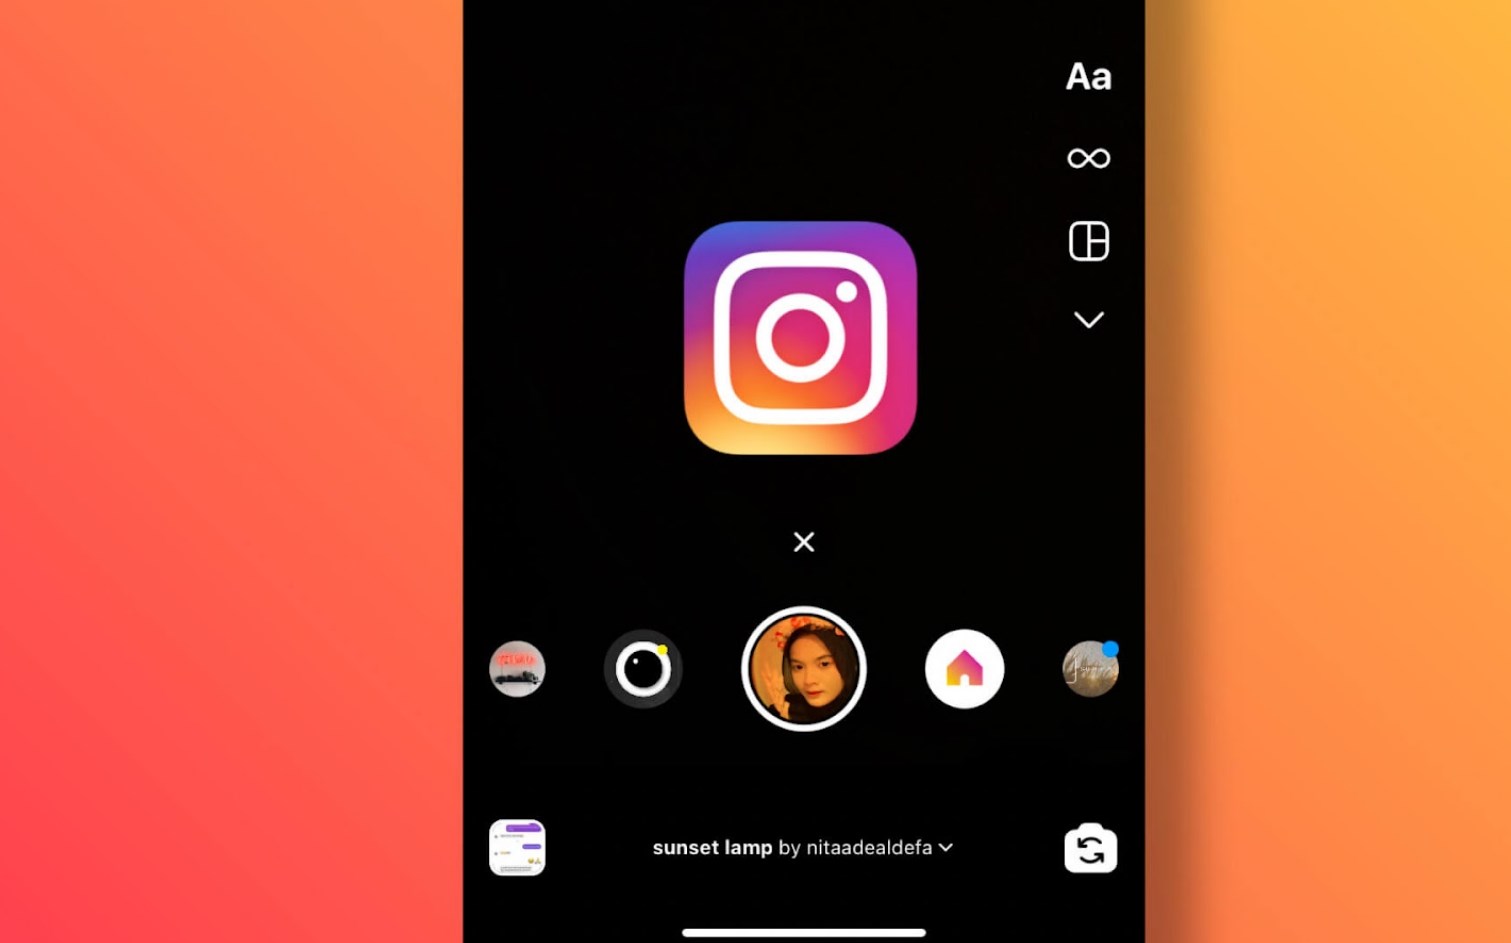 How to Add Instagram Filter to Existing Photo